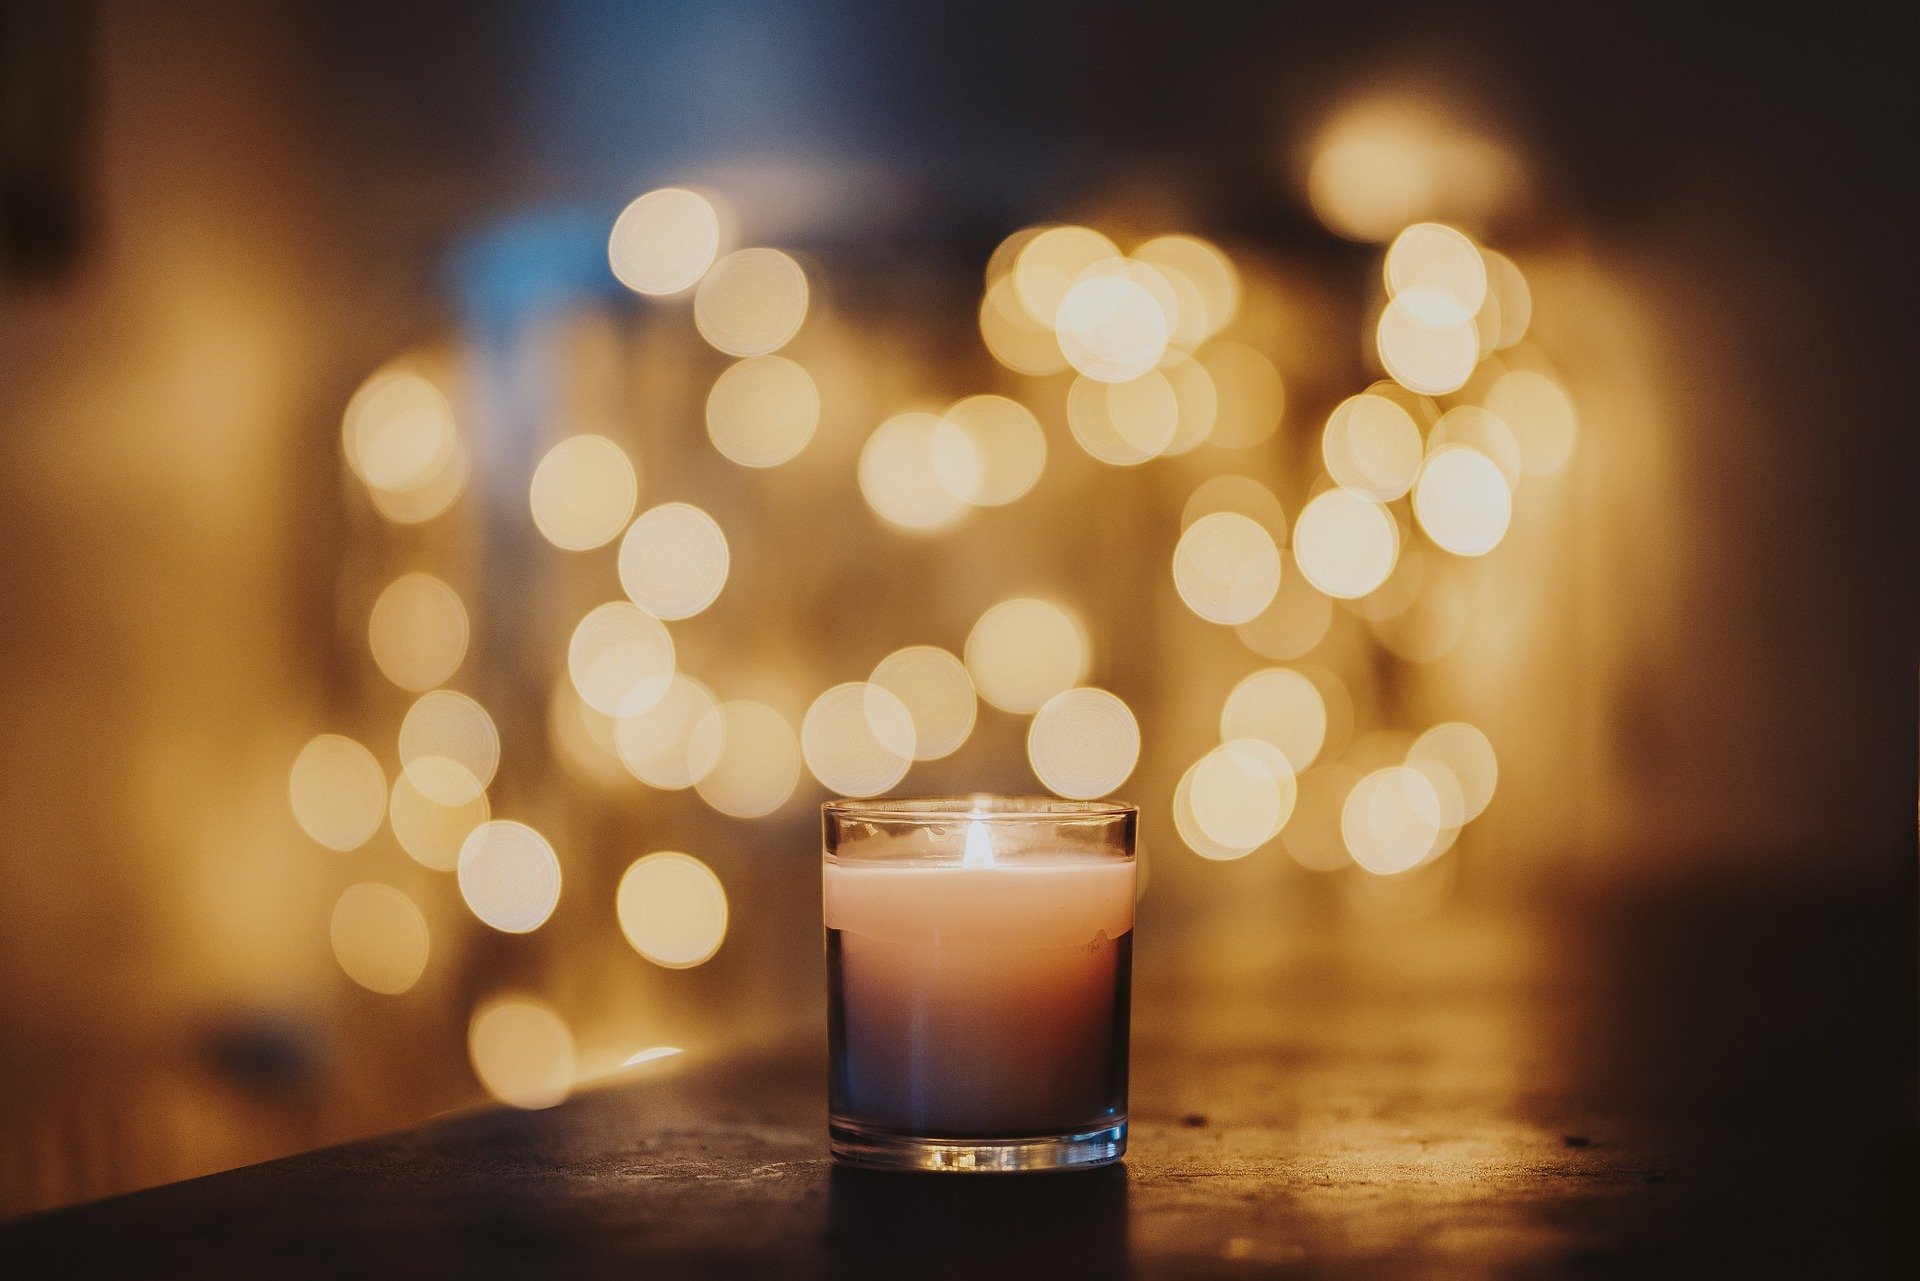 A small, lit peach-coloured candle in a glass on a table in a dark room. In the background, fairy lights glow a warm yellow.